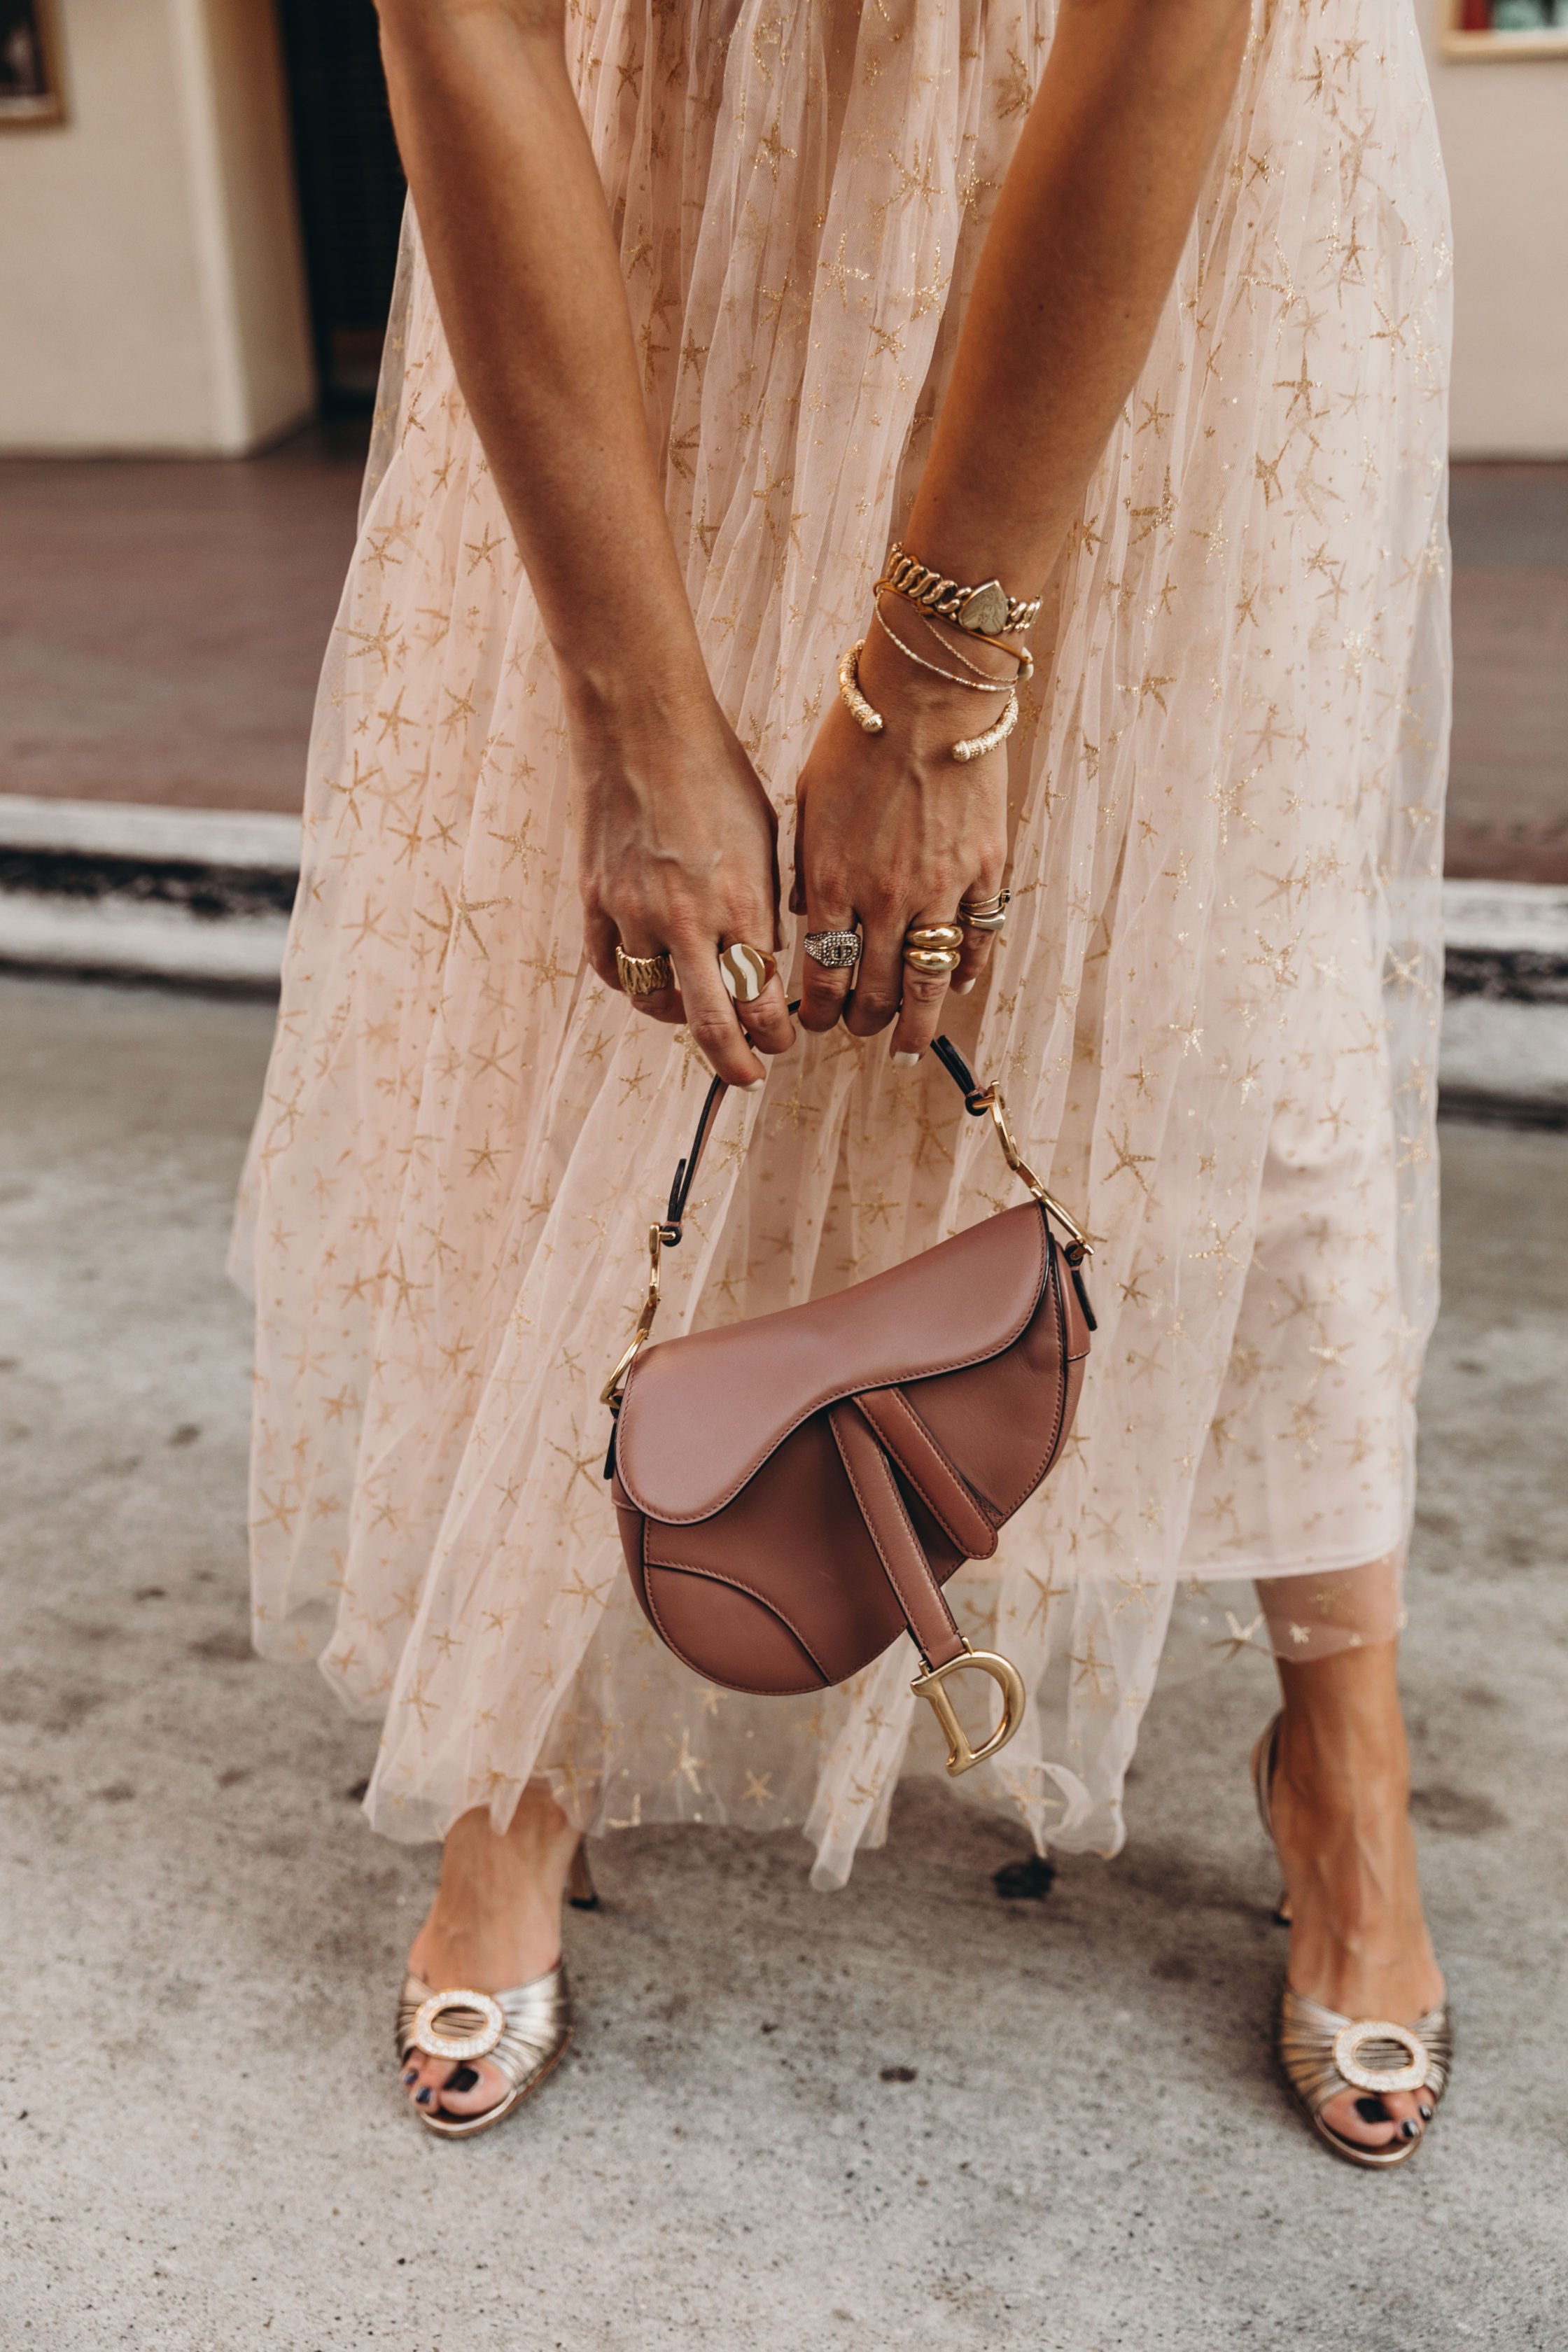 Party outfit wearing a Champagne tulle dress and Manolo Blahnik sandals